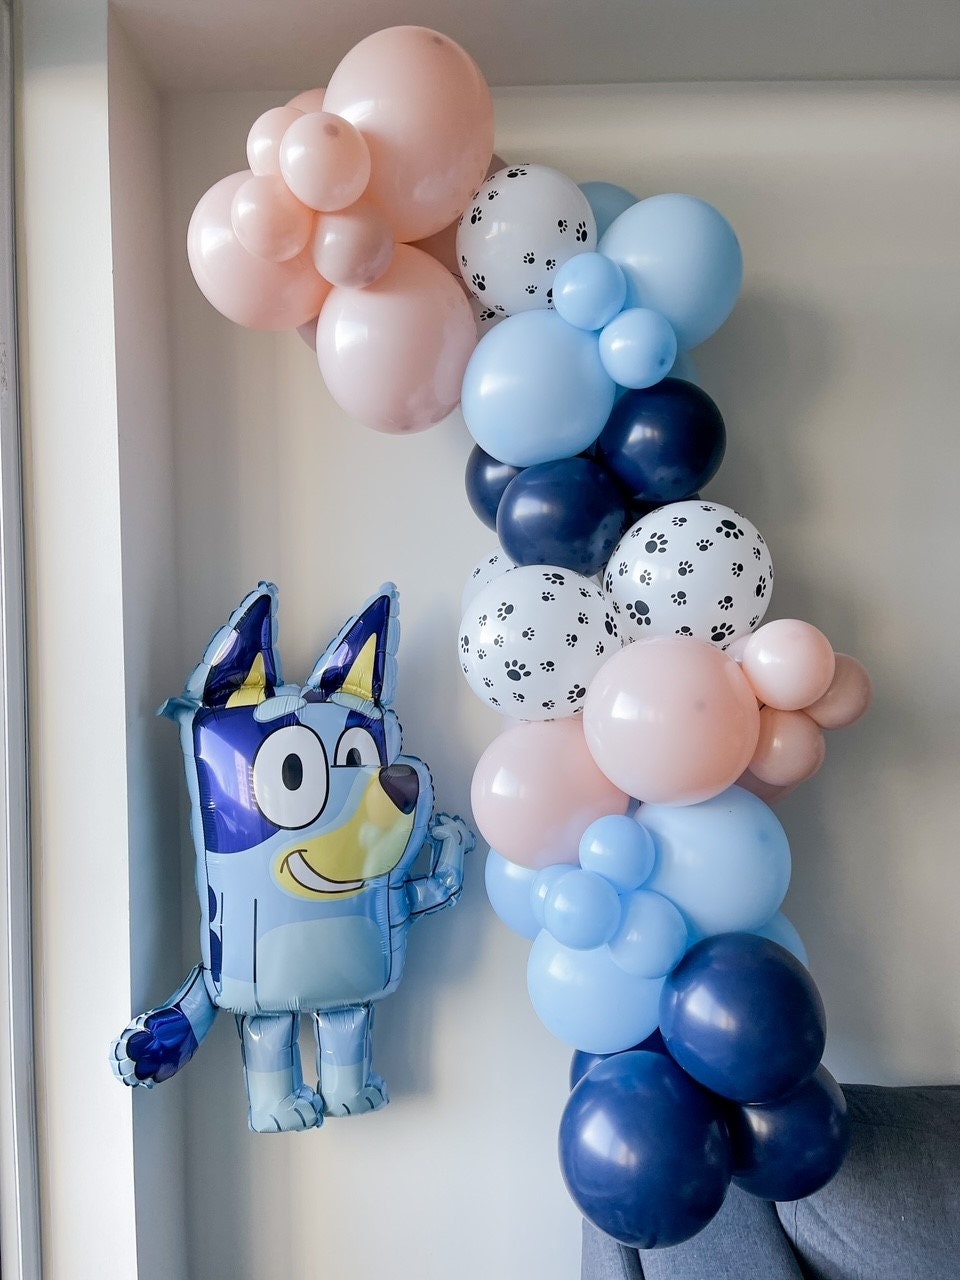 Bluey Balloon Backdrop, Let's Pawty Balloon Garland, Bluey Birthday Party  Balloon Arch, Bluey Themed Baby Shower, Puppy Party Decor 